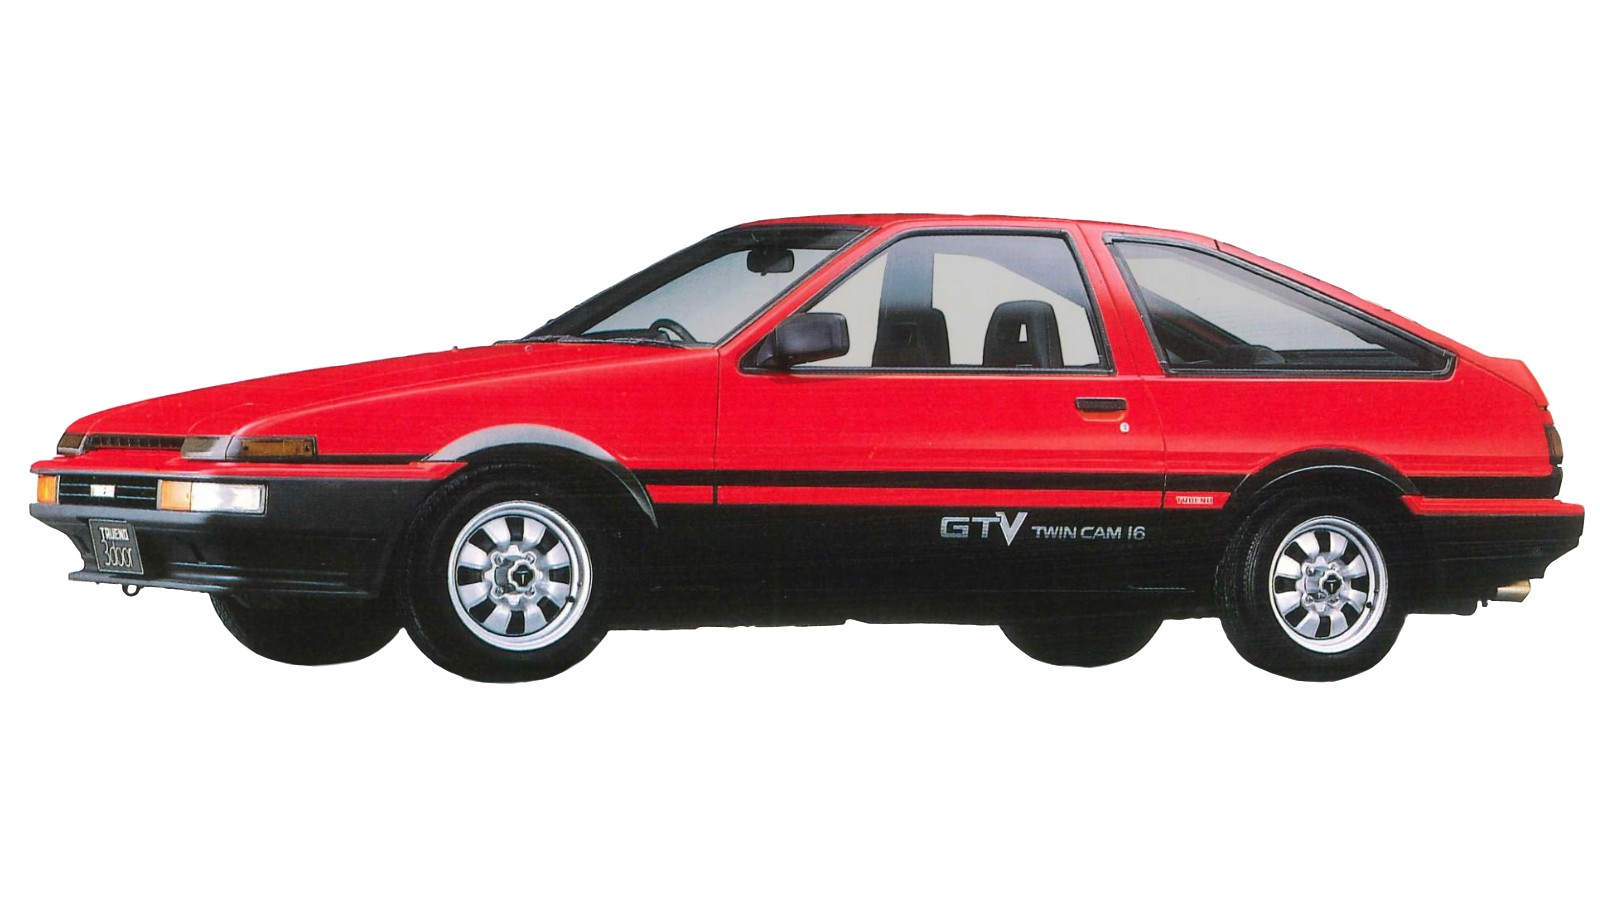 Cult classic AE86 Corolla gets reproduction parts boost